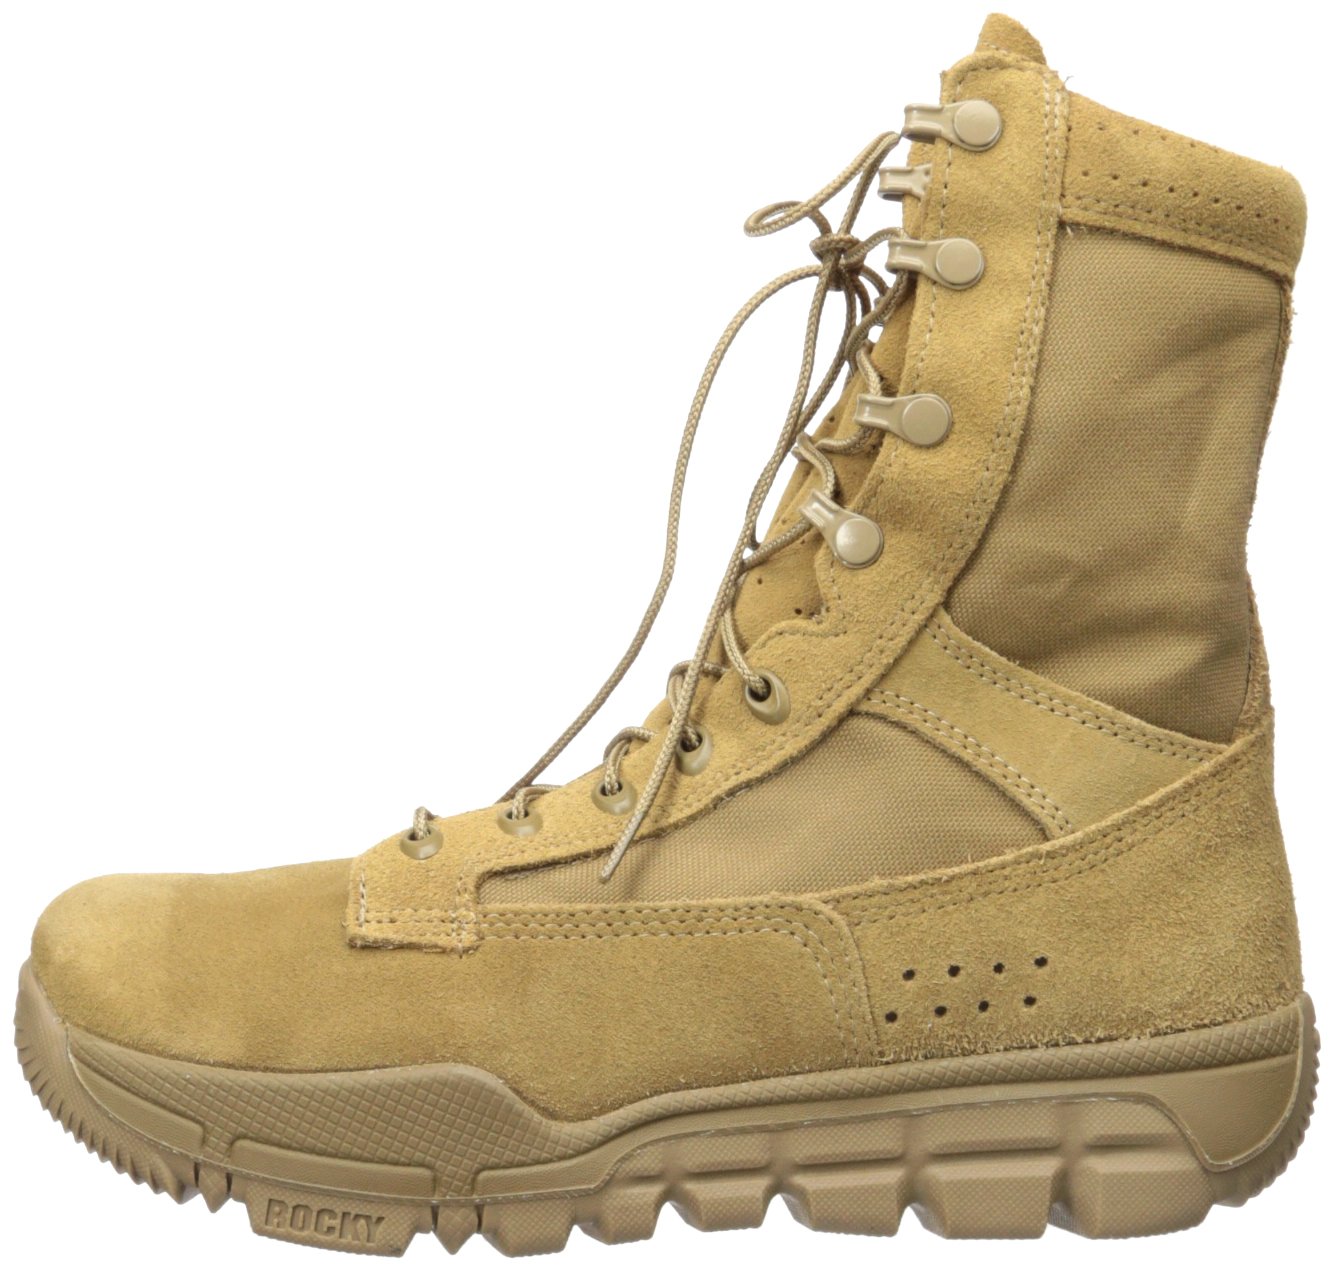 Rocky Men's Rkc042 Military and Tactical Boot